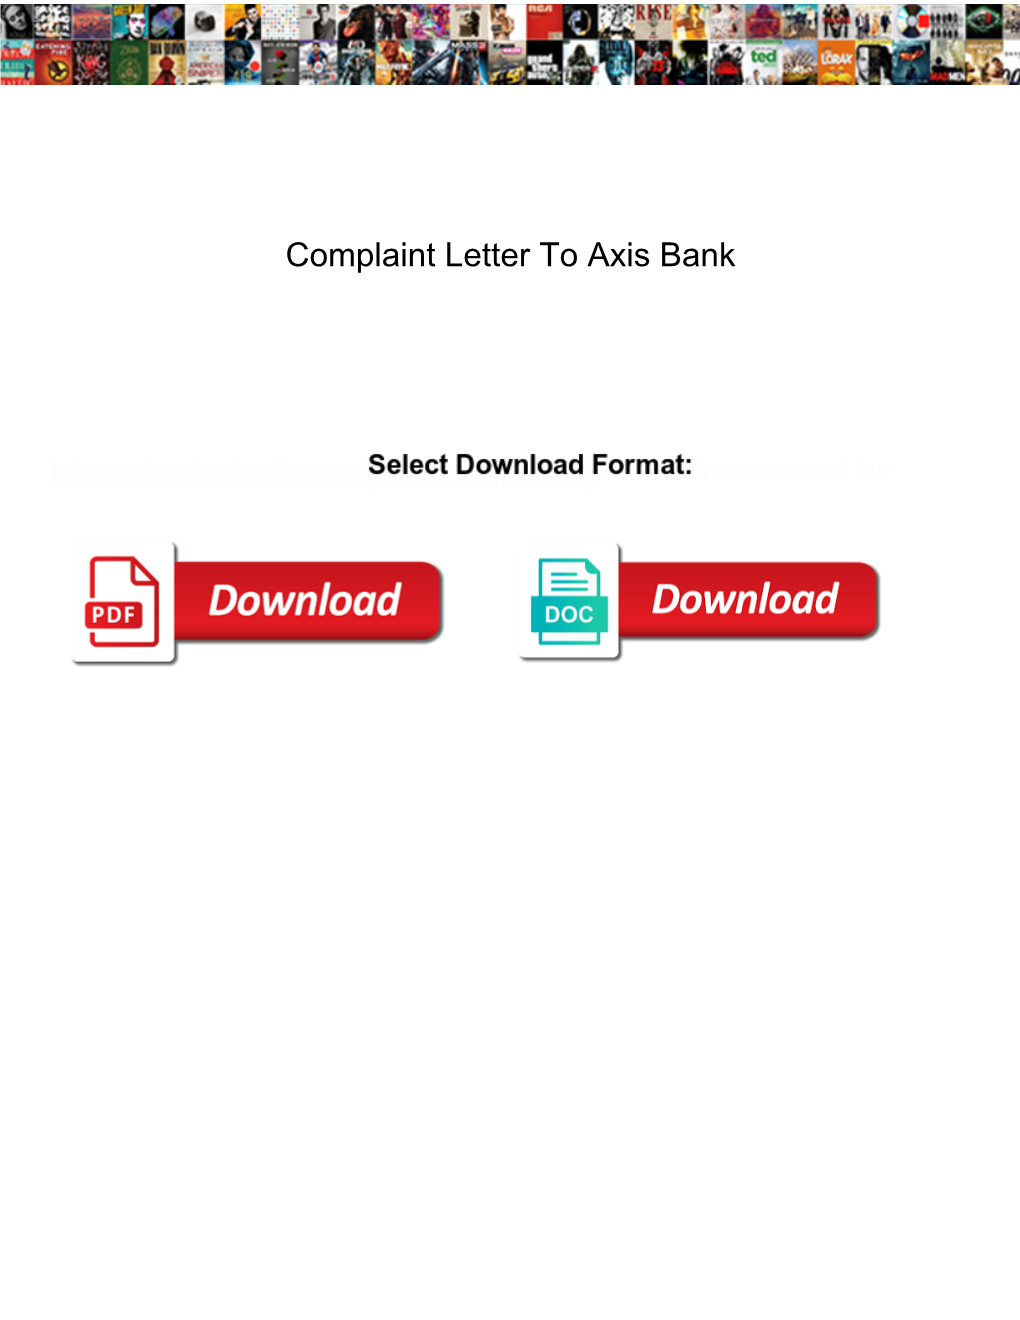 Complaint Letter to Axis Bank